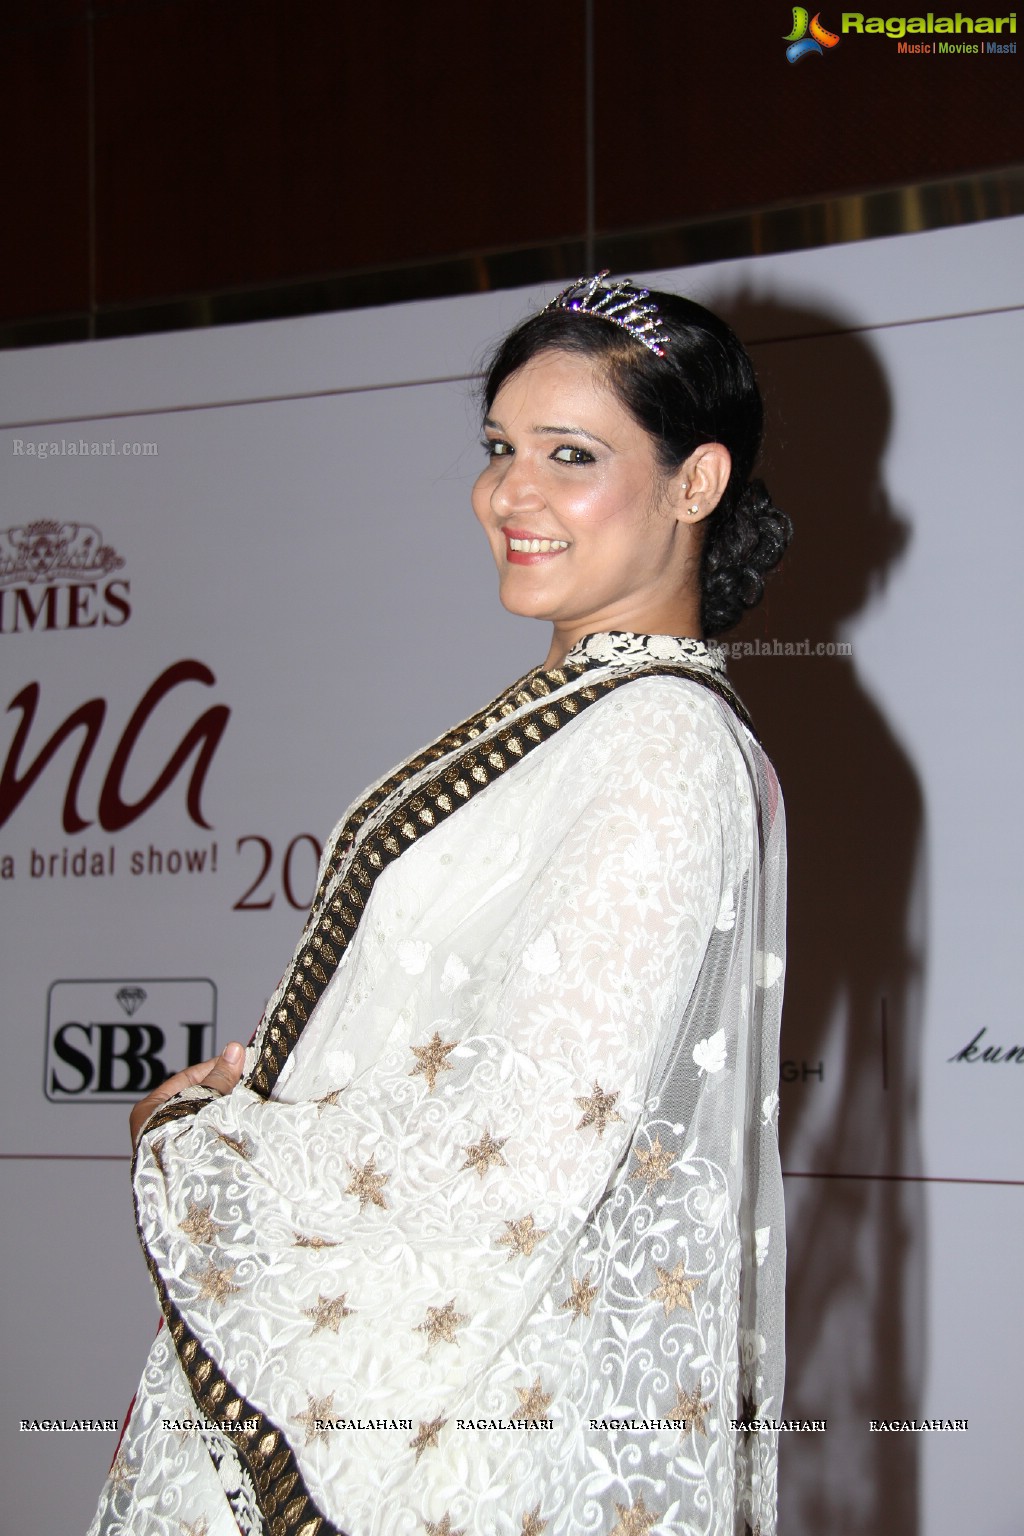 Shreedevi Chowdary inaugurates Times Gehena Jewellery and Bridal Exhibition